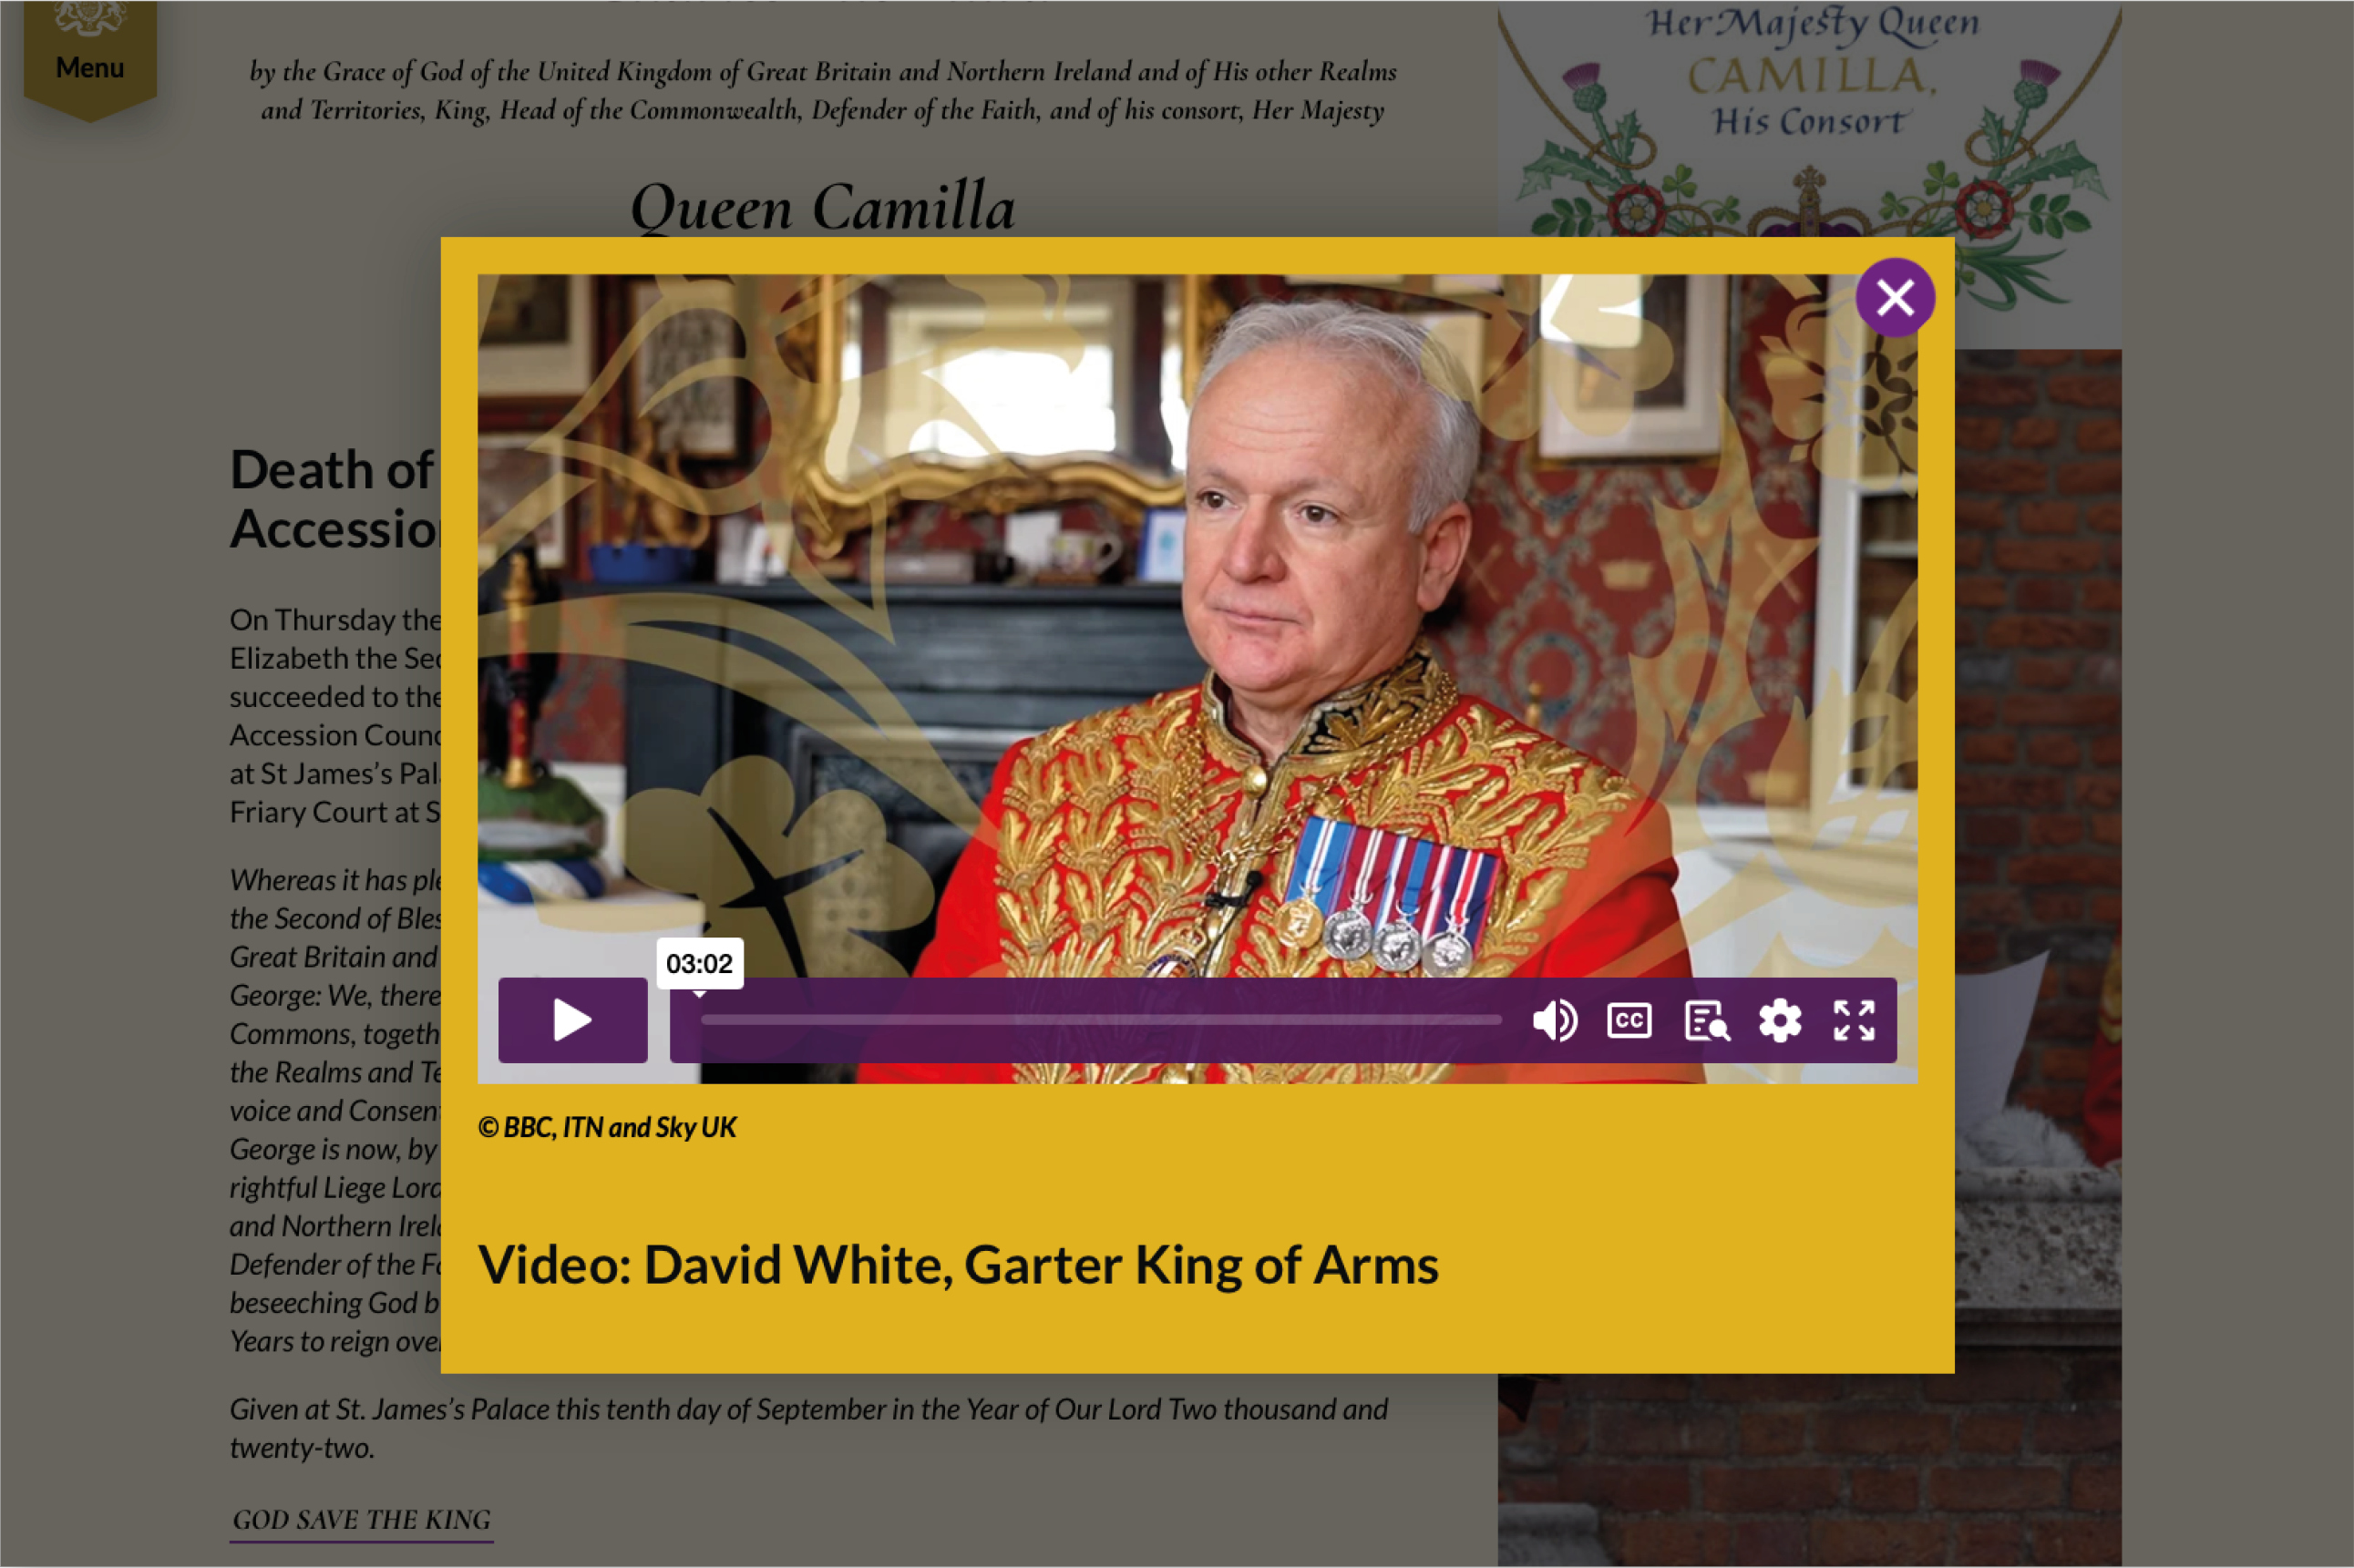 Screenshot of video content available on the Coronation roll website